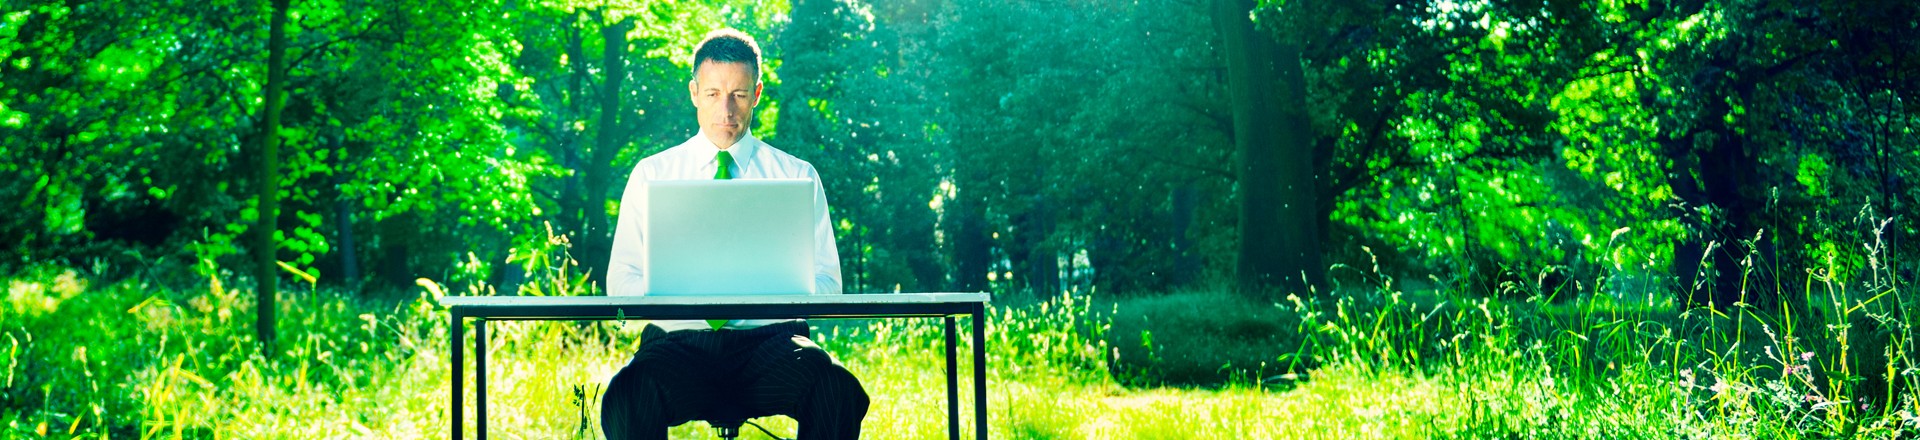 small work breaks improve health when sitting all day